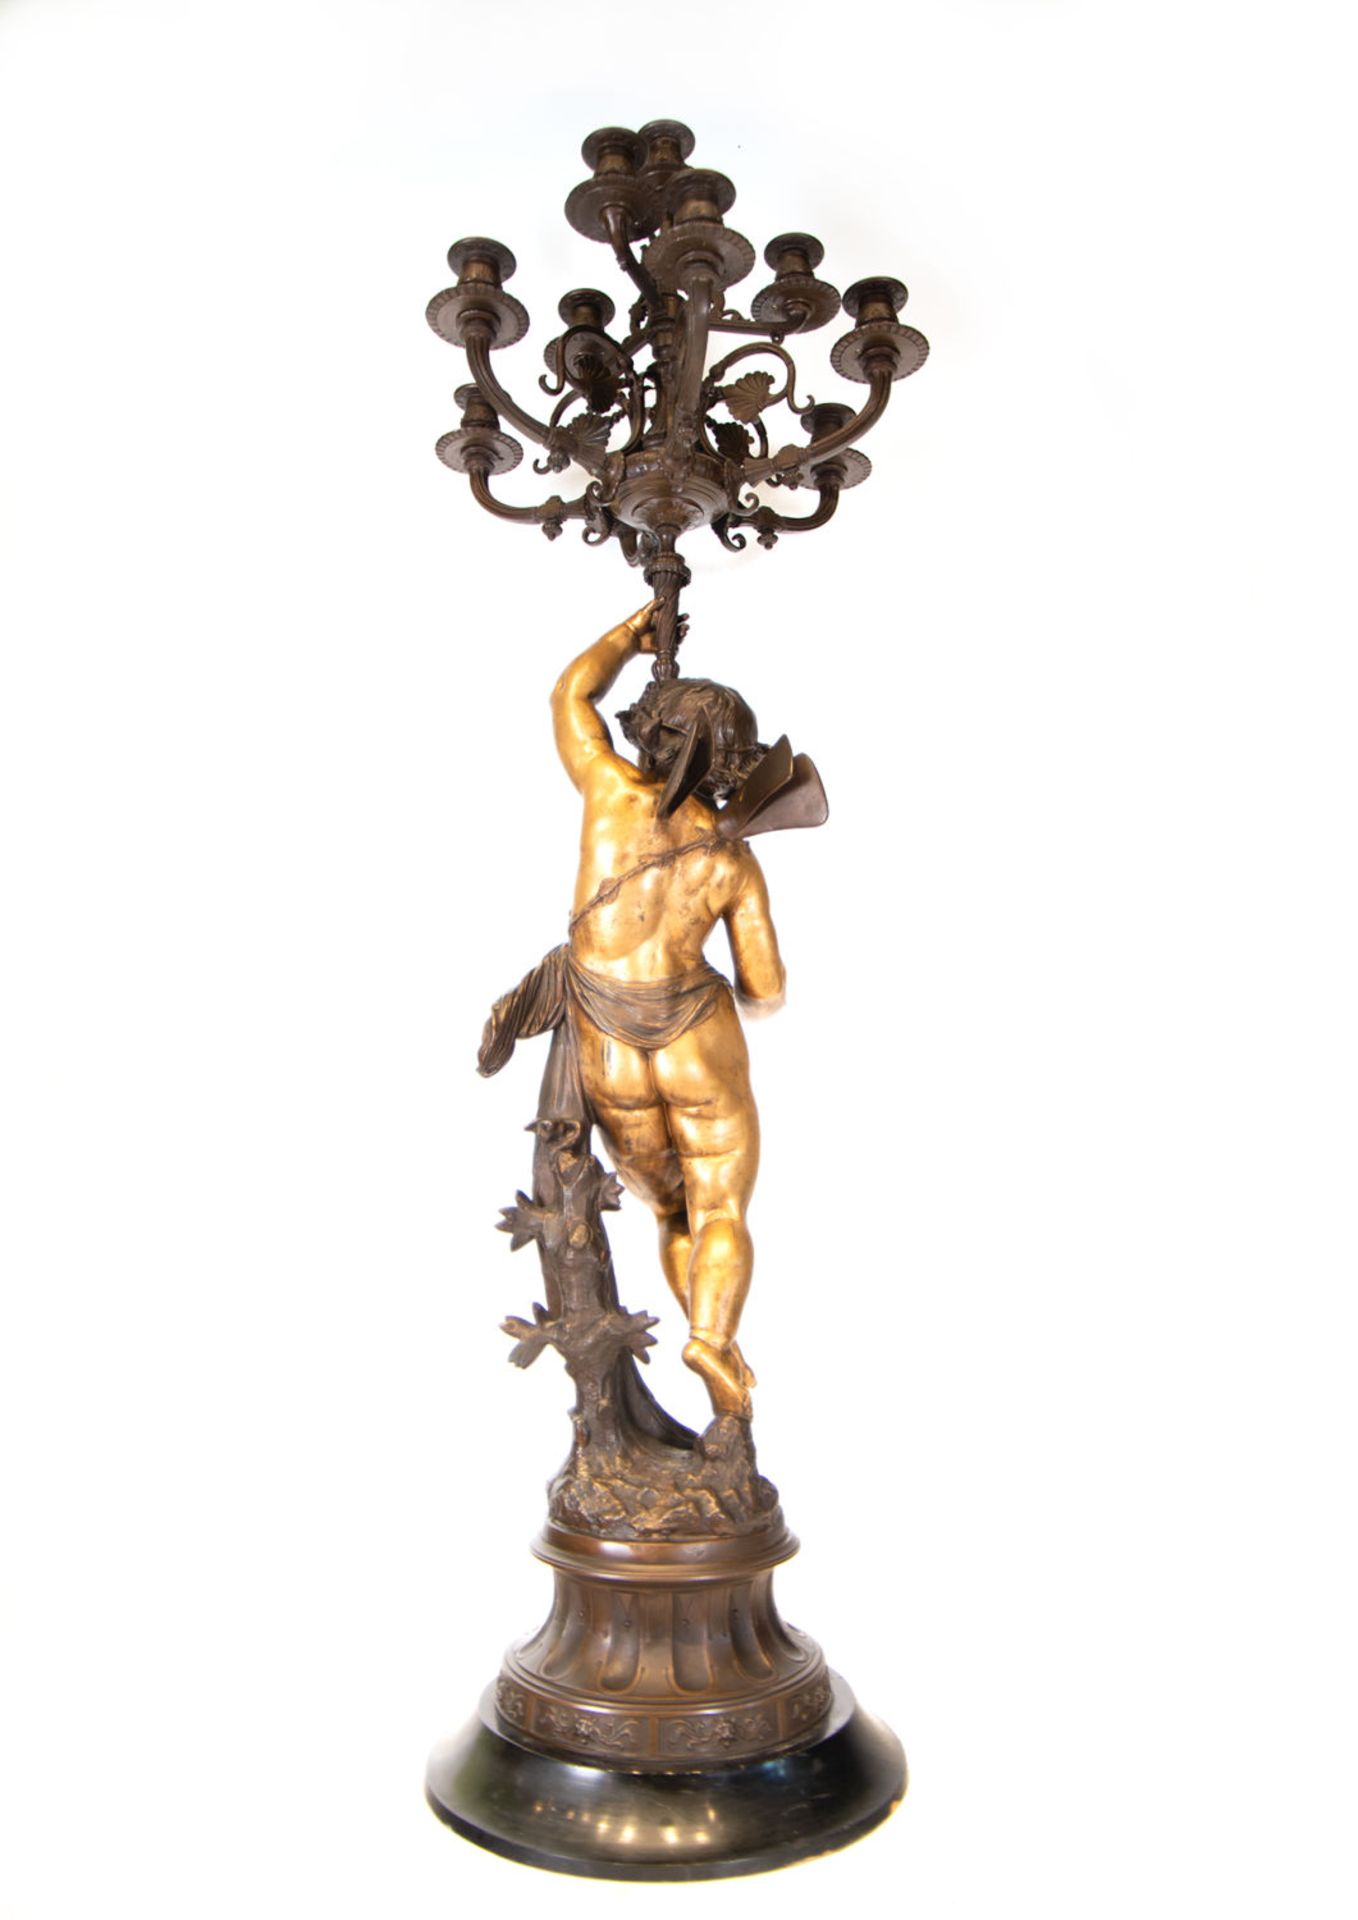 Massive Pair of French 19th Gilt Bronze Torcheres in the manner of Jean Baptiste Carpeaux NO RESERVE - Image 5 of 9